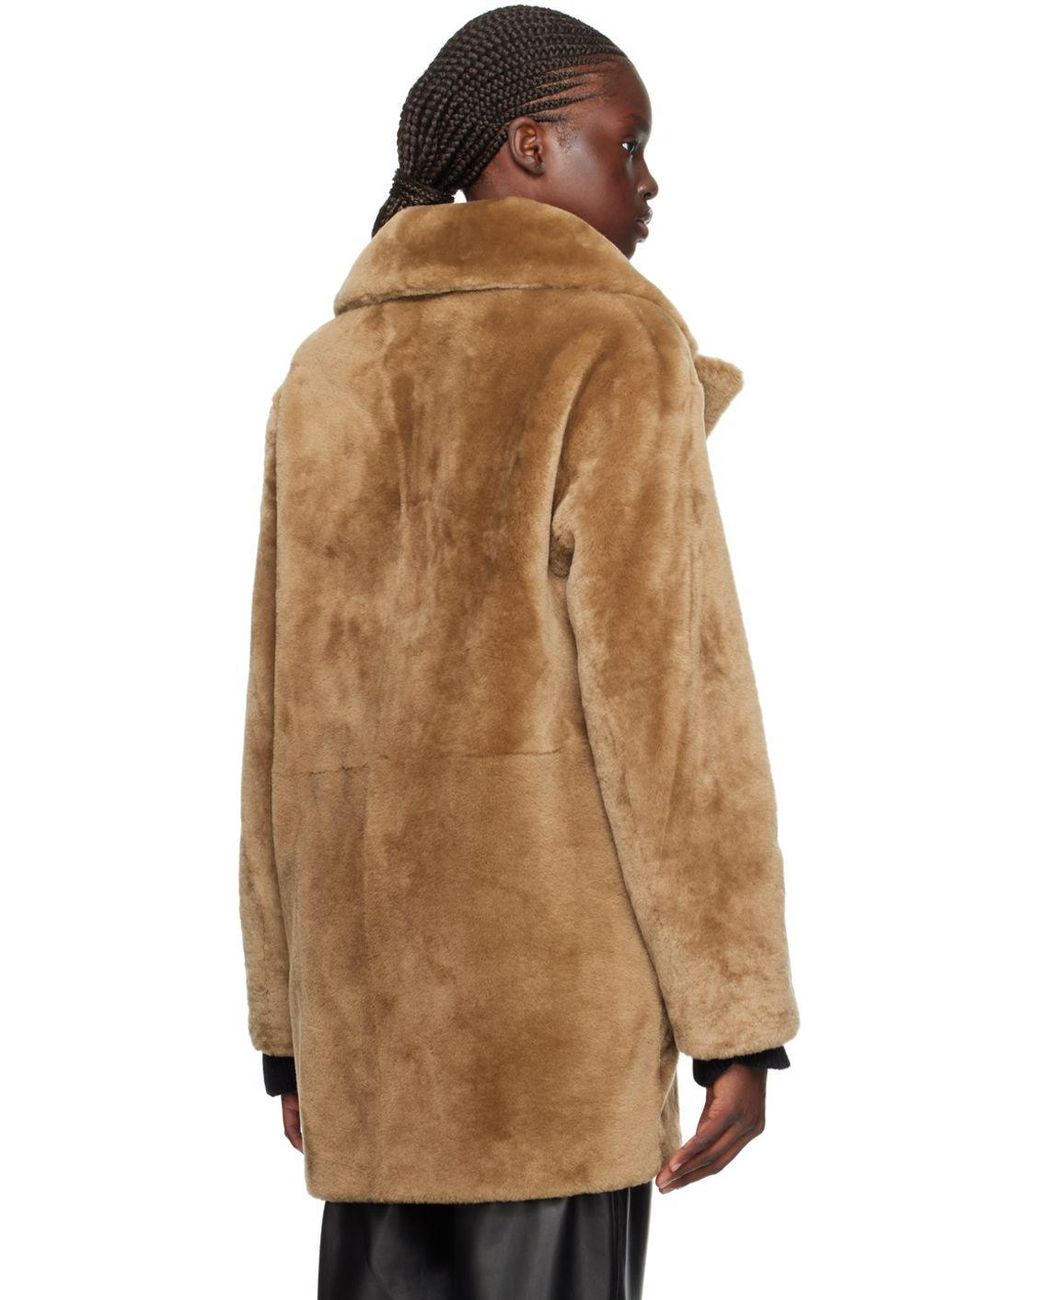 Meteo by Yves Salomon Brown Notched Lapel Shearling Coat | Lyst